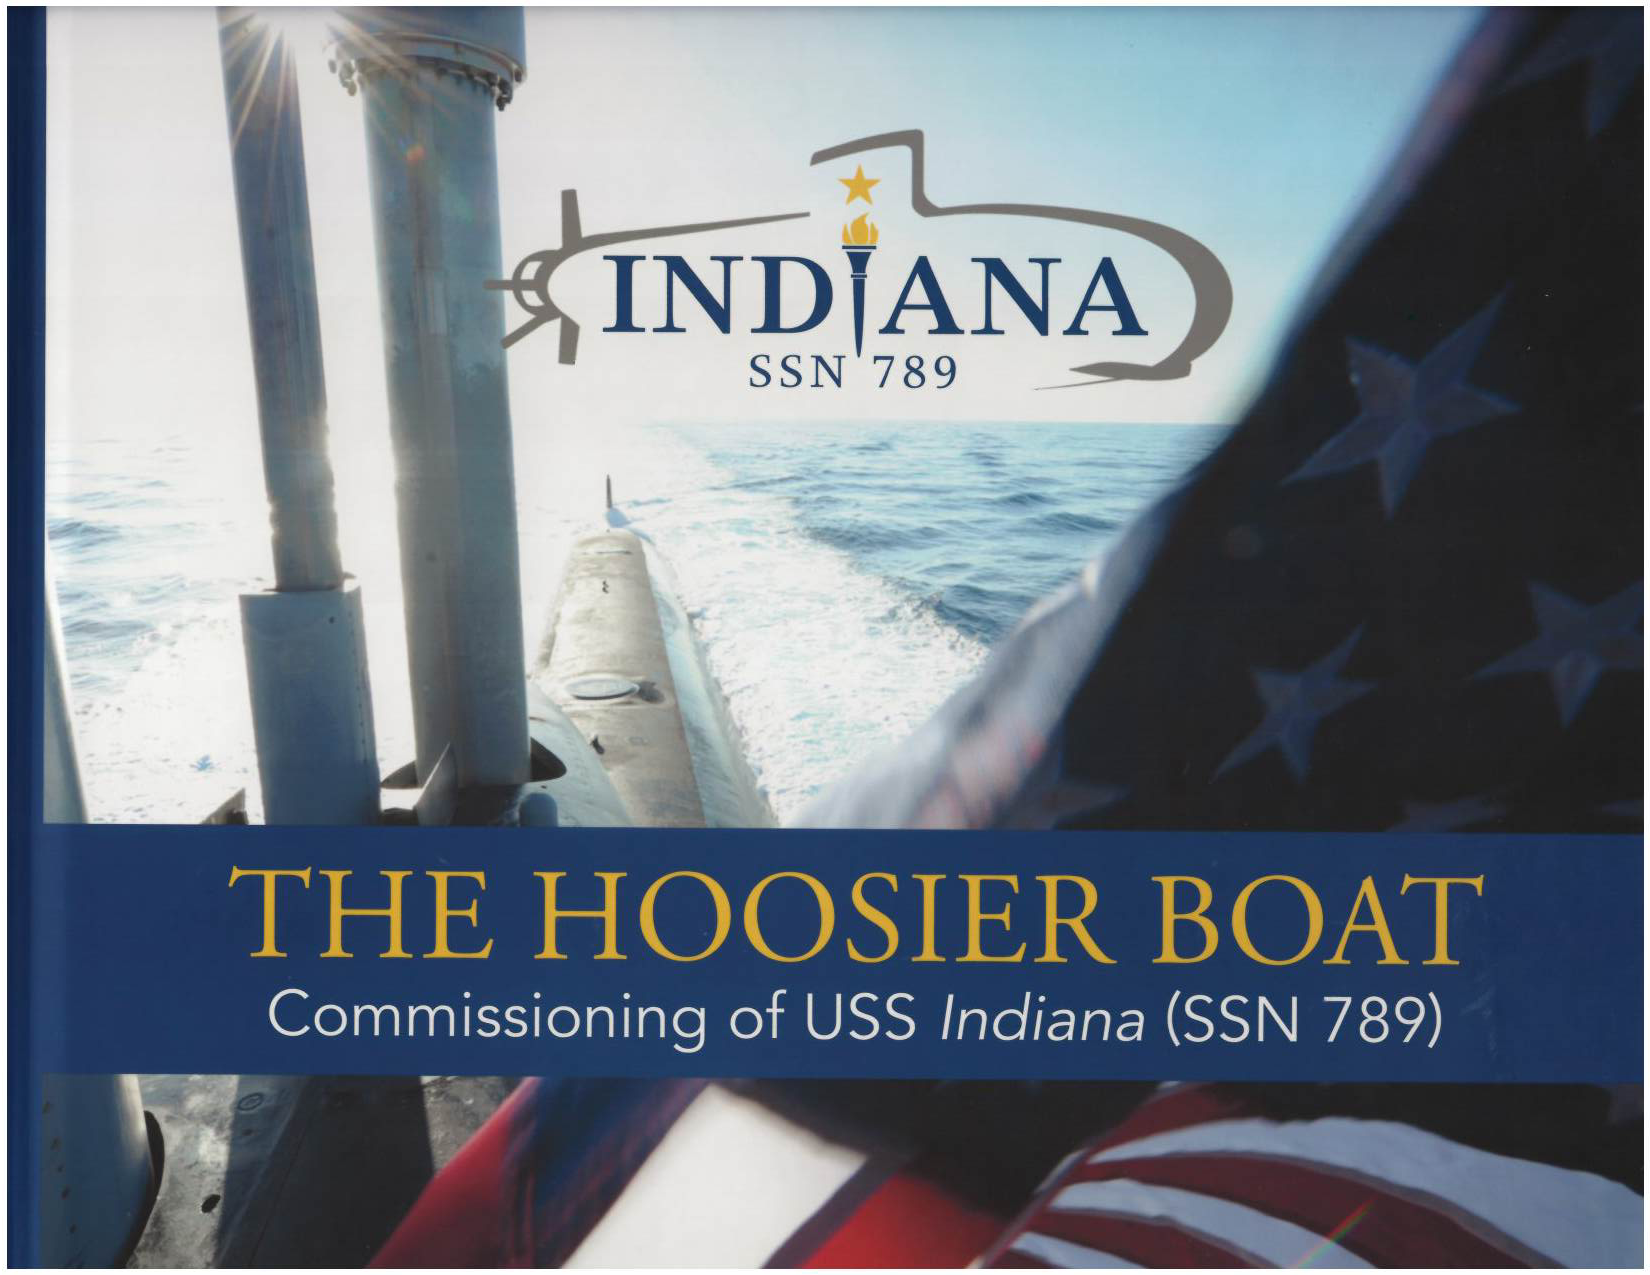 USS Indiana Commissioning Book